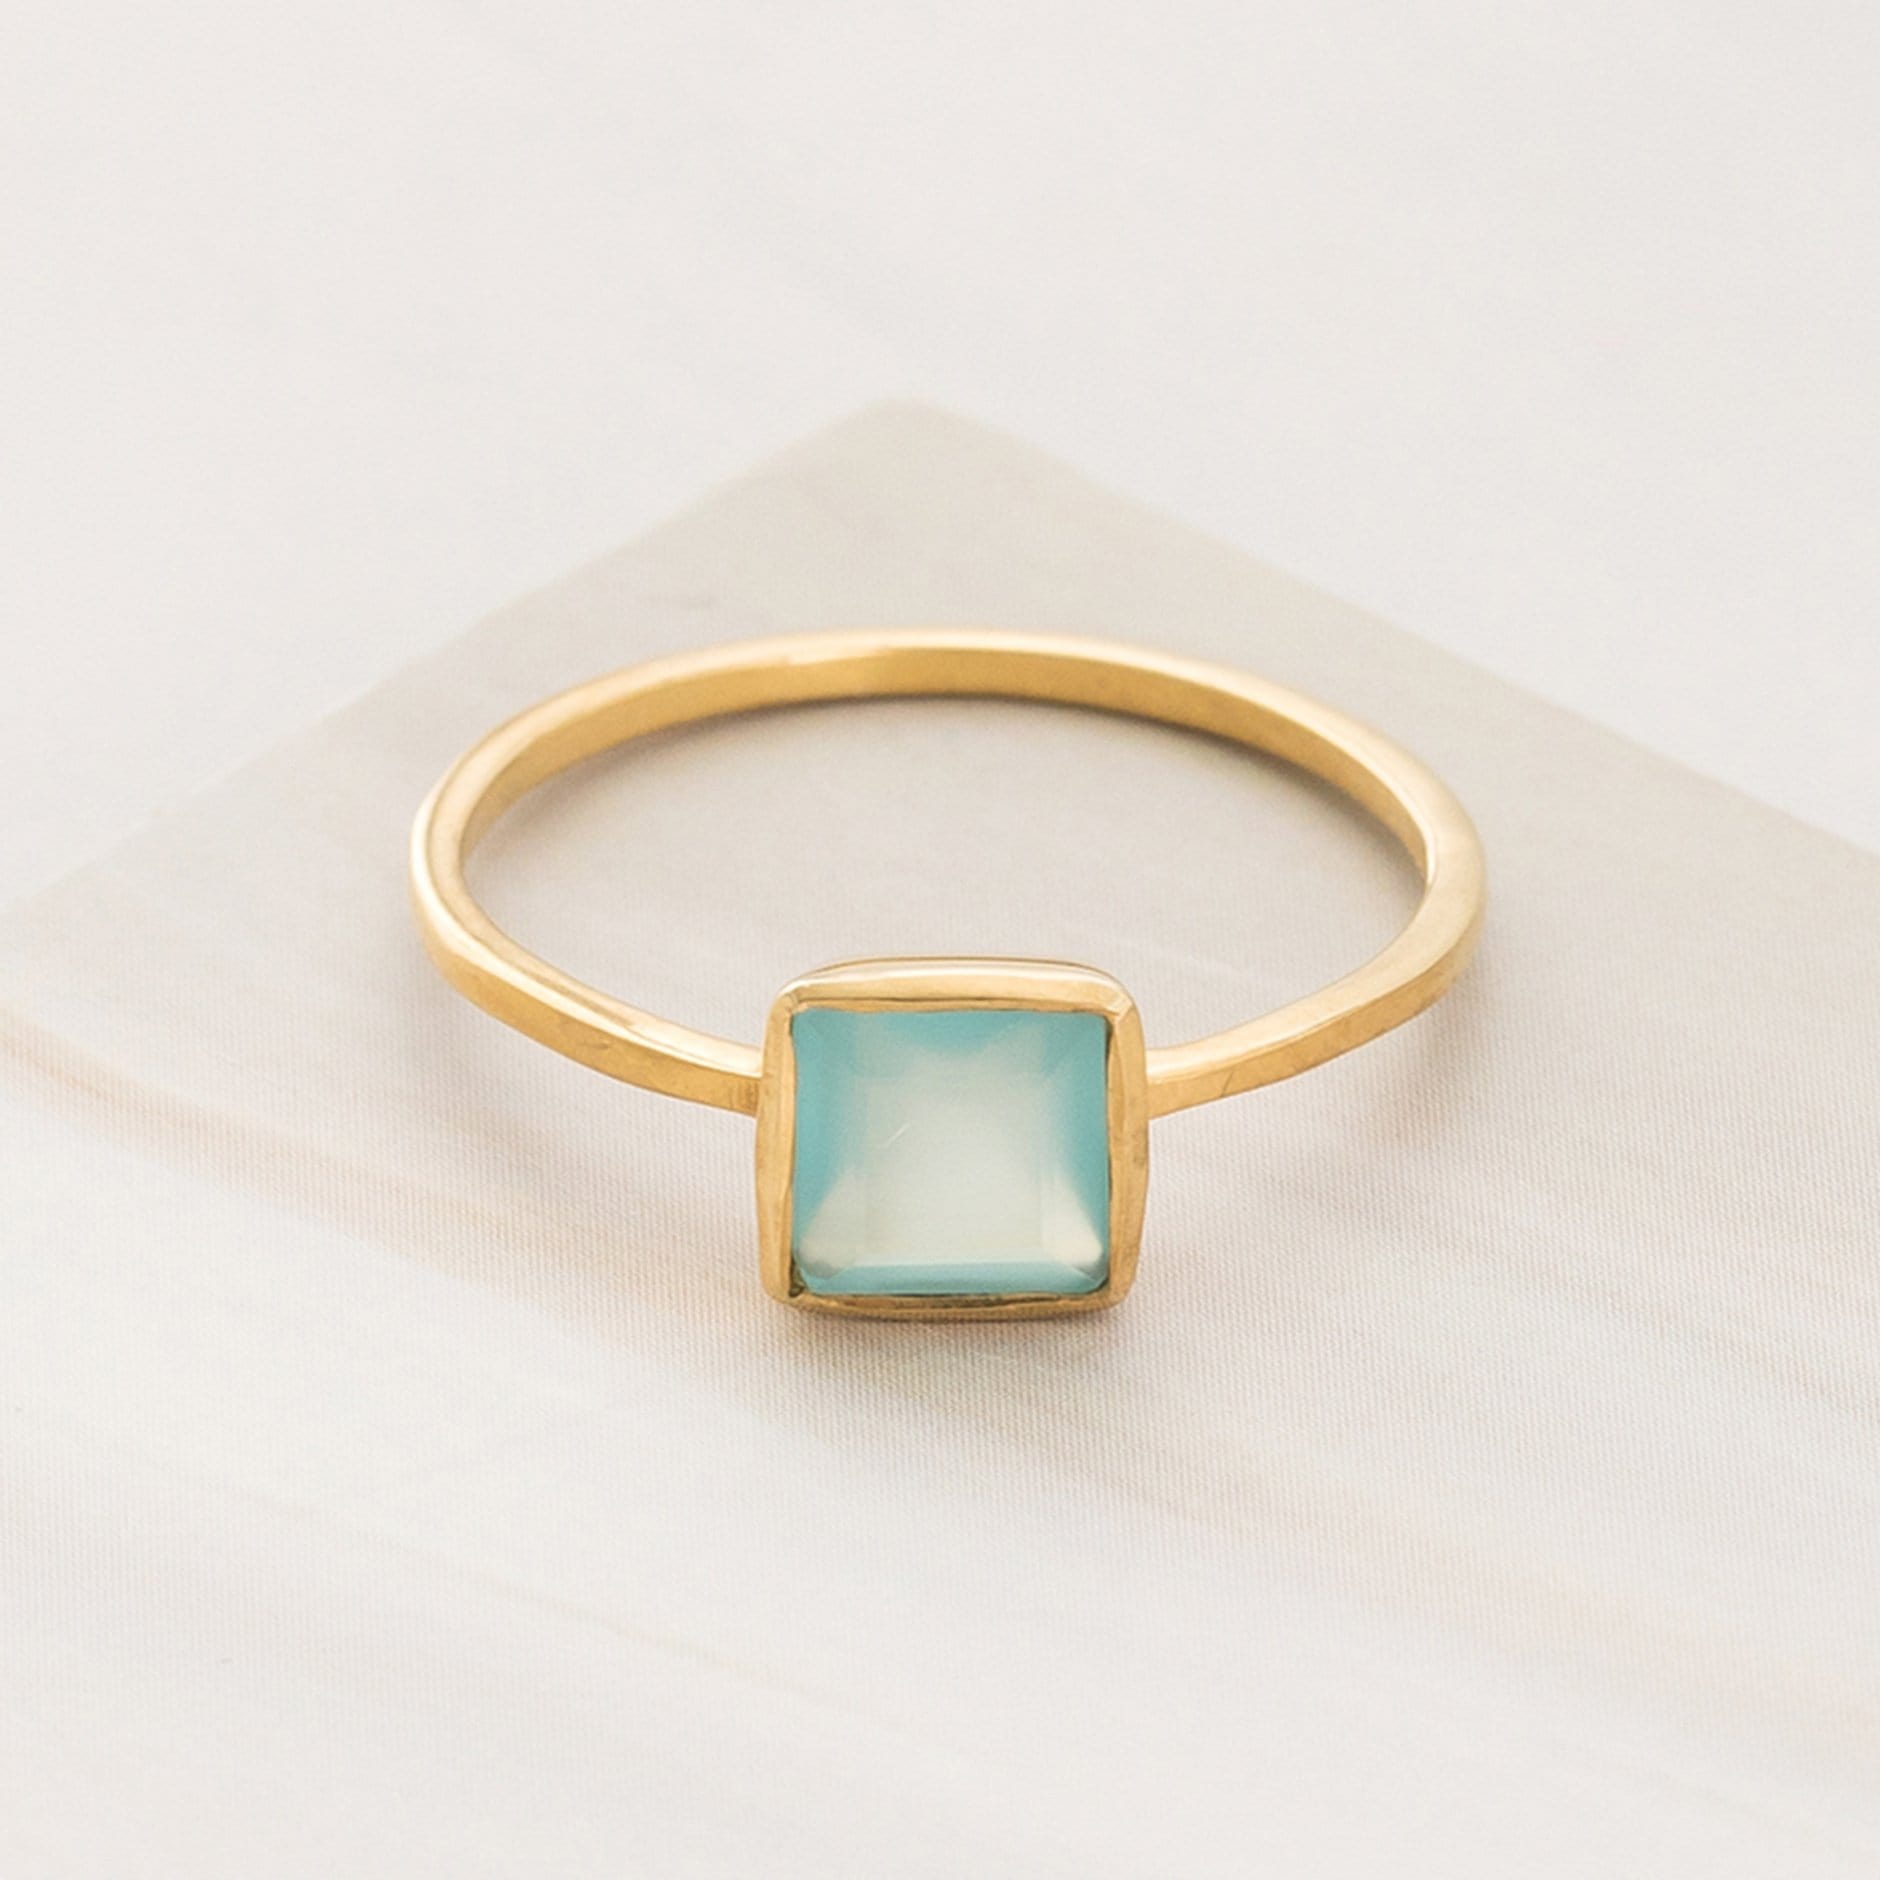 Emblem Jewelry Rings Chalcedony / Square Signature Candy Gemstone Stack Rings (Ring Size 5)